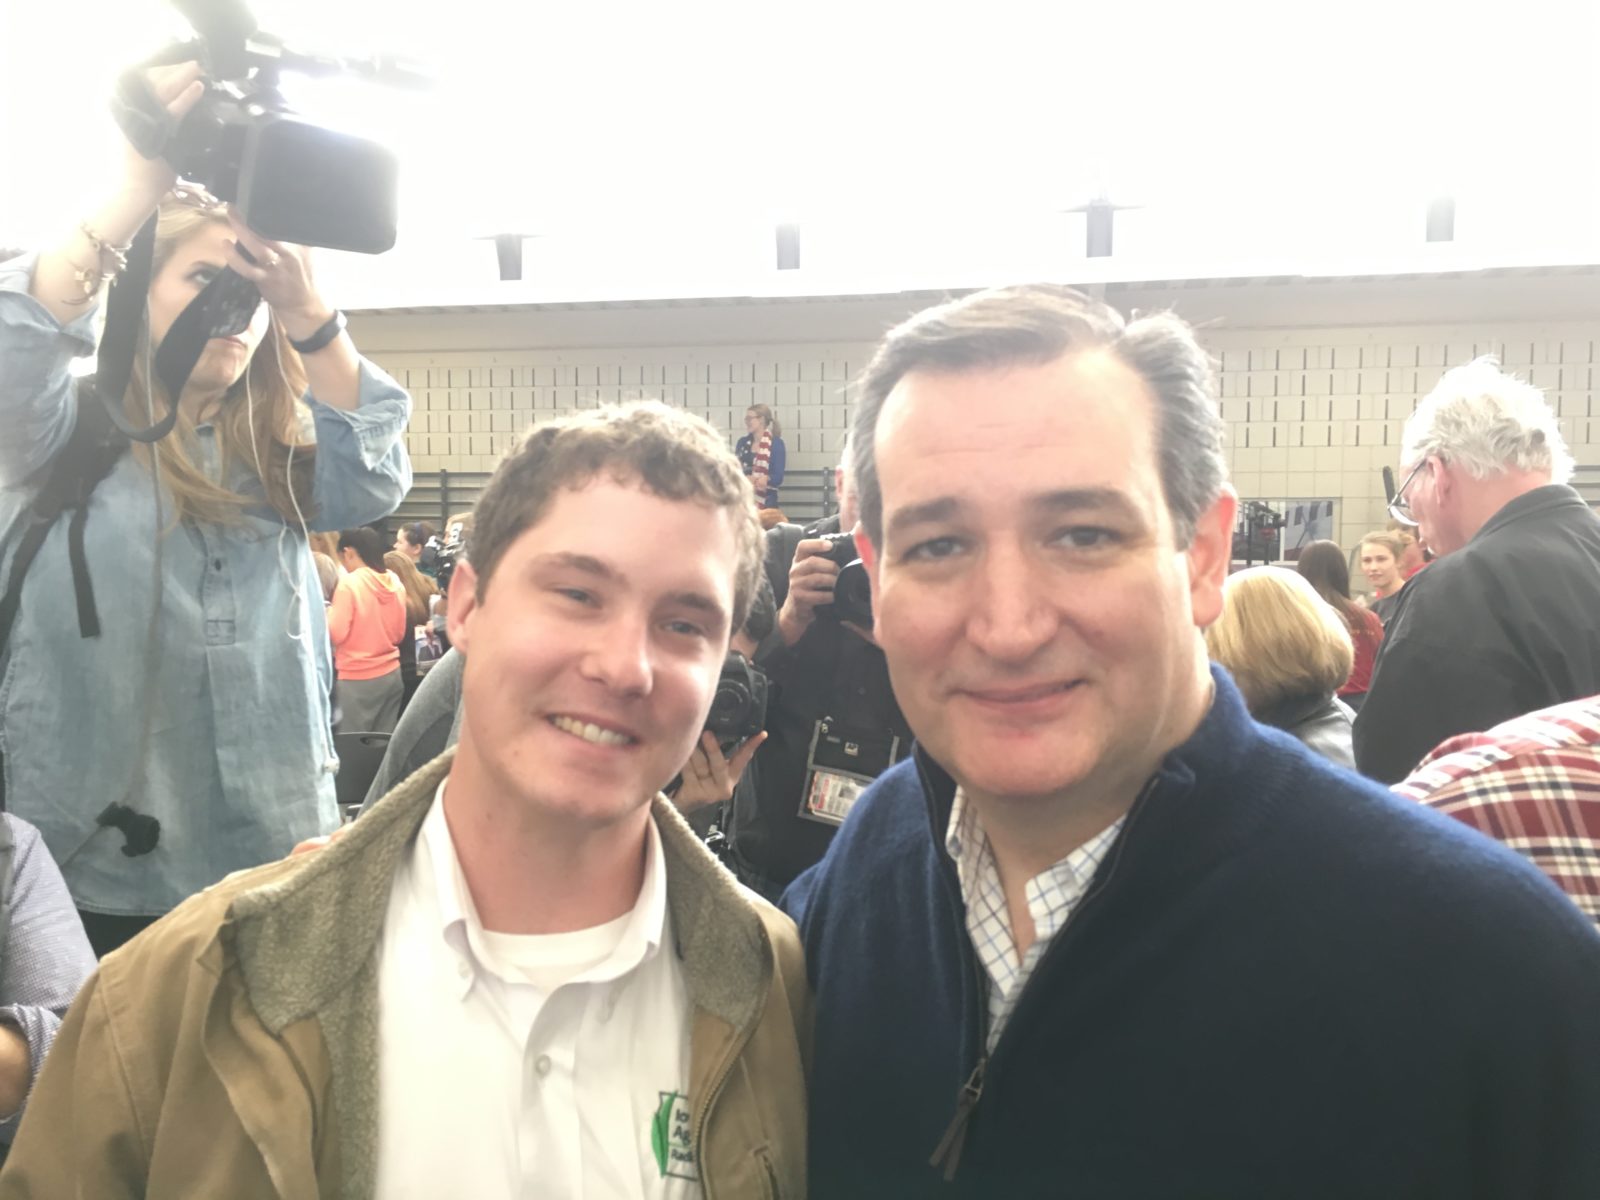 Ben Nuelle (IPJ 14) meets presidential candidate Sen. Ted Cruz while covering the Iowa caucus.